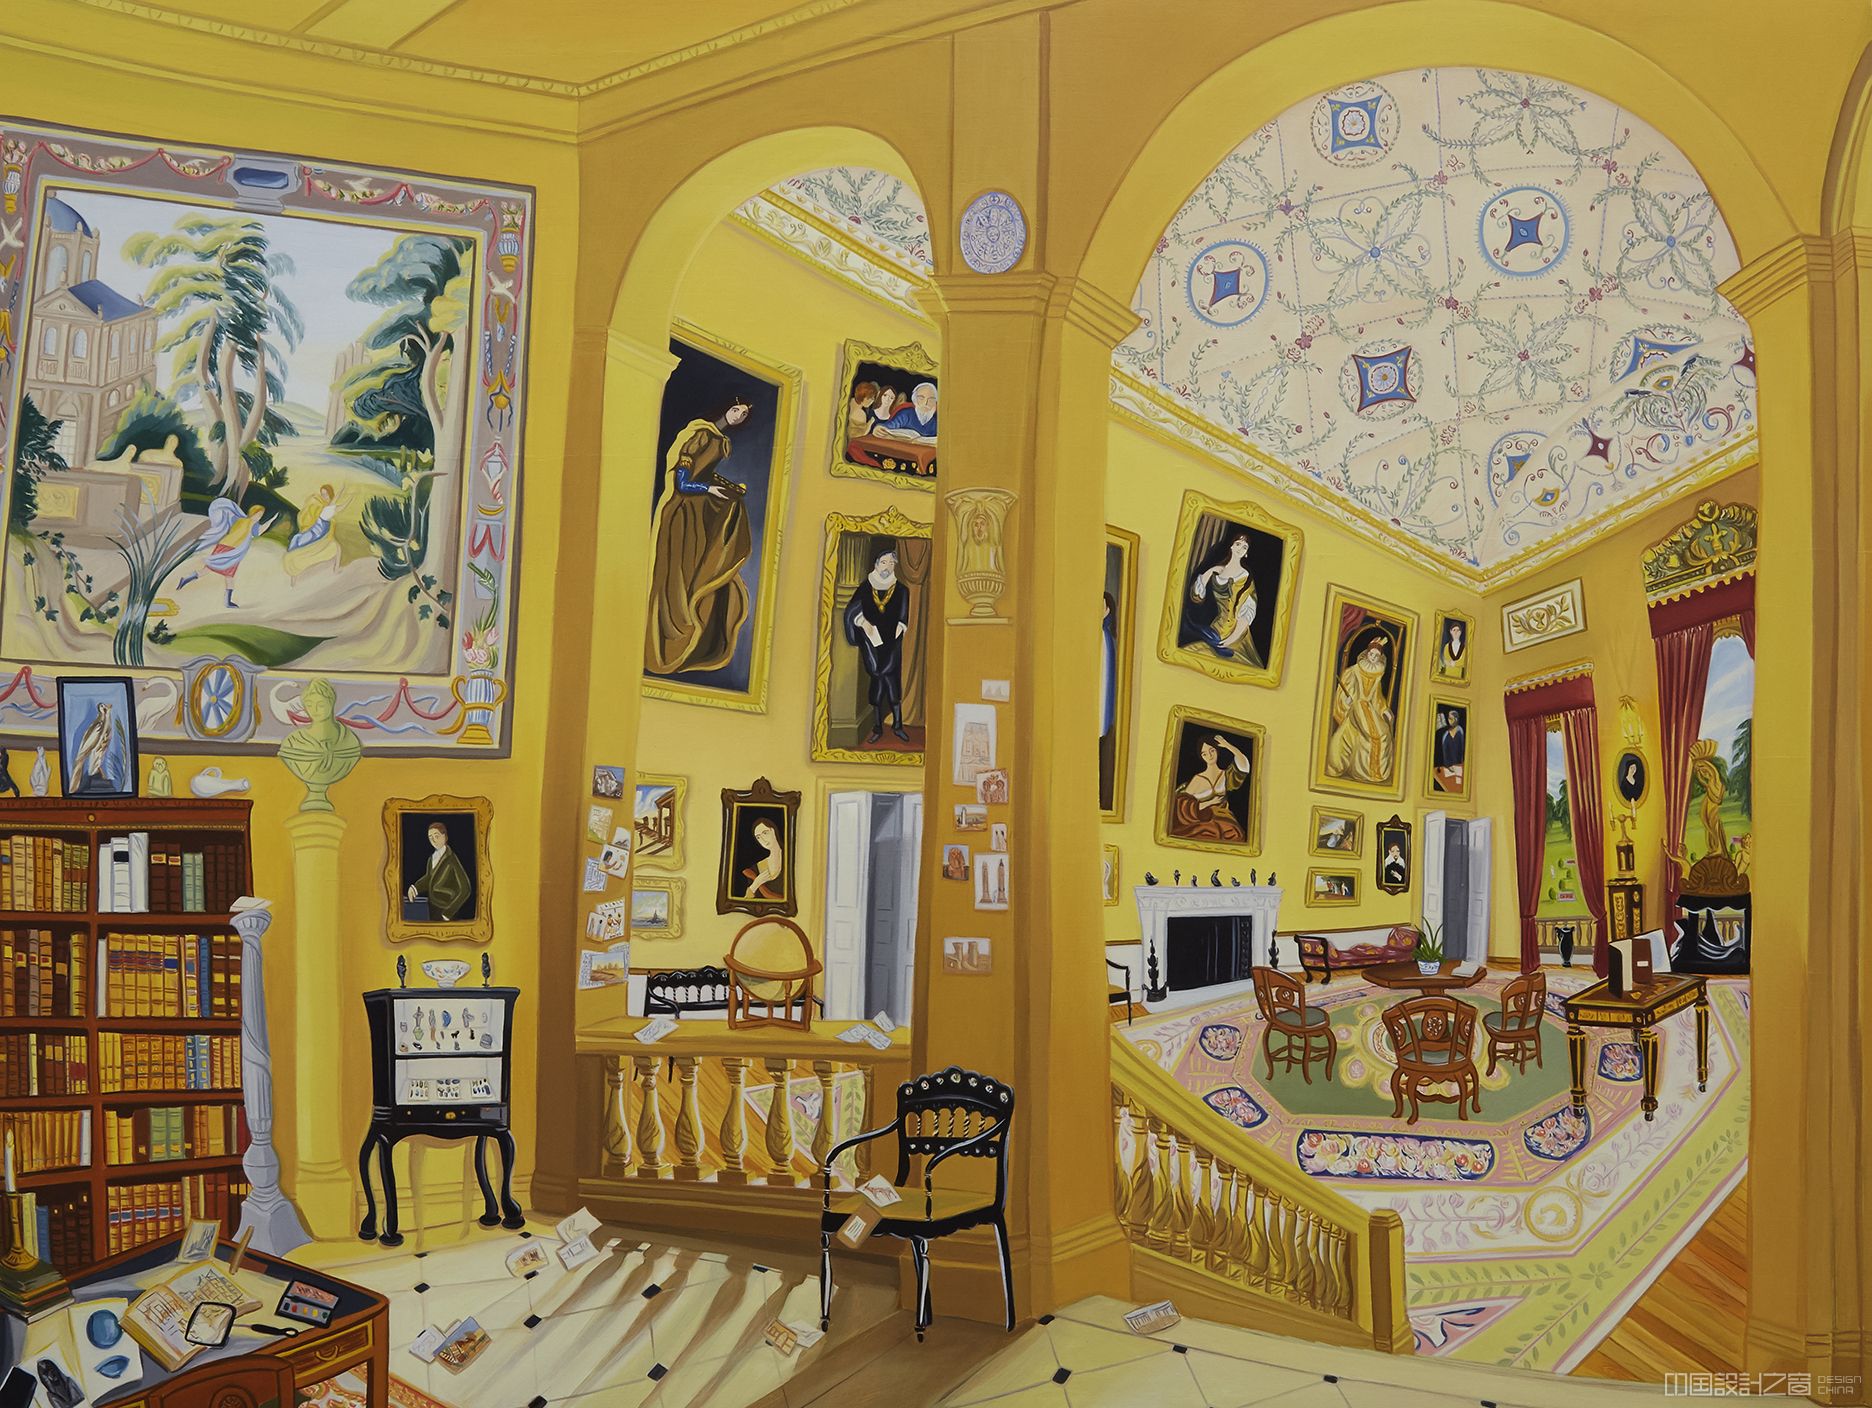 A colorful painting of a historic interior with dozens of paintings.